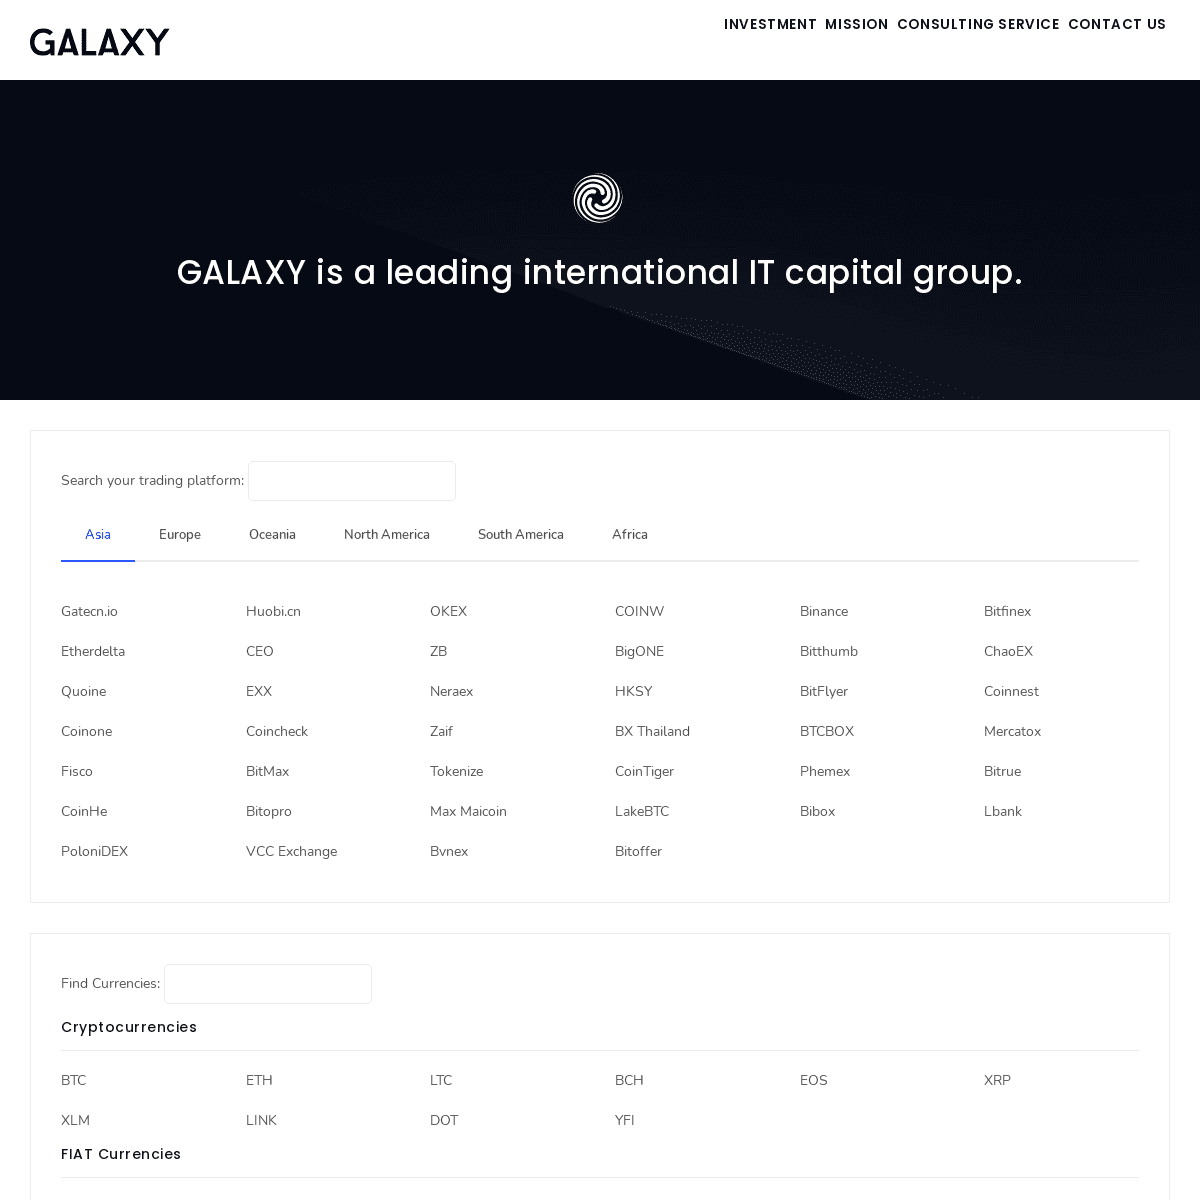 A complete backup of https://galaxy.com